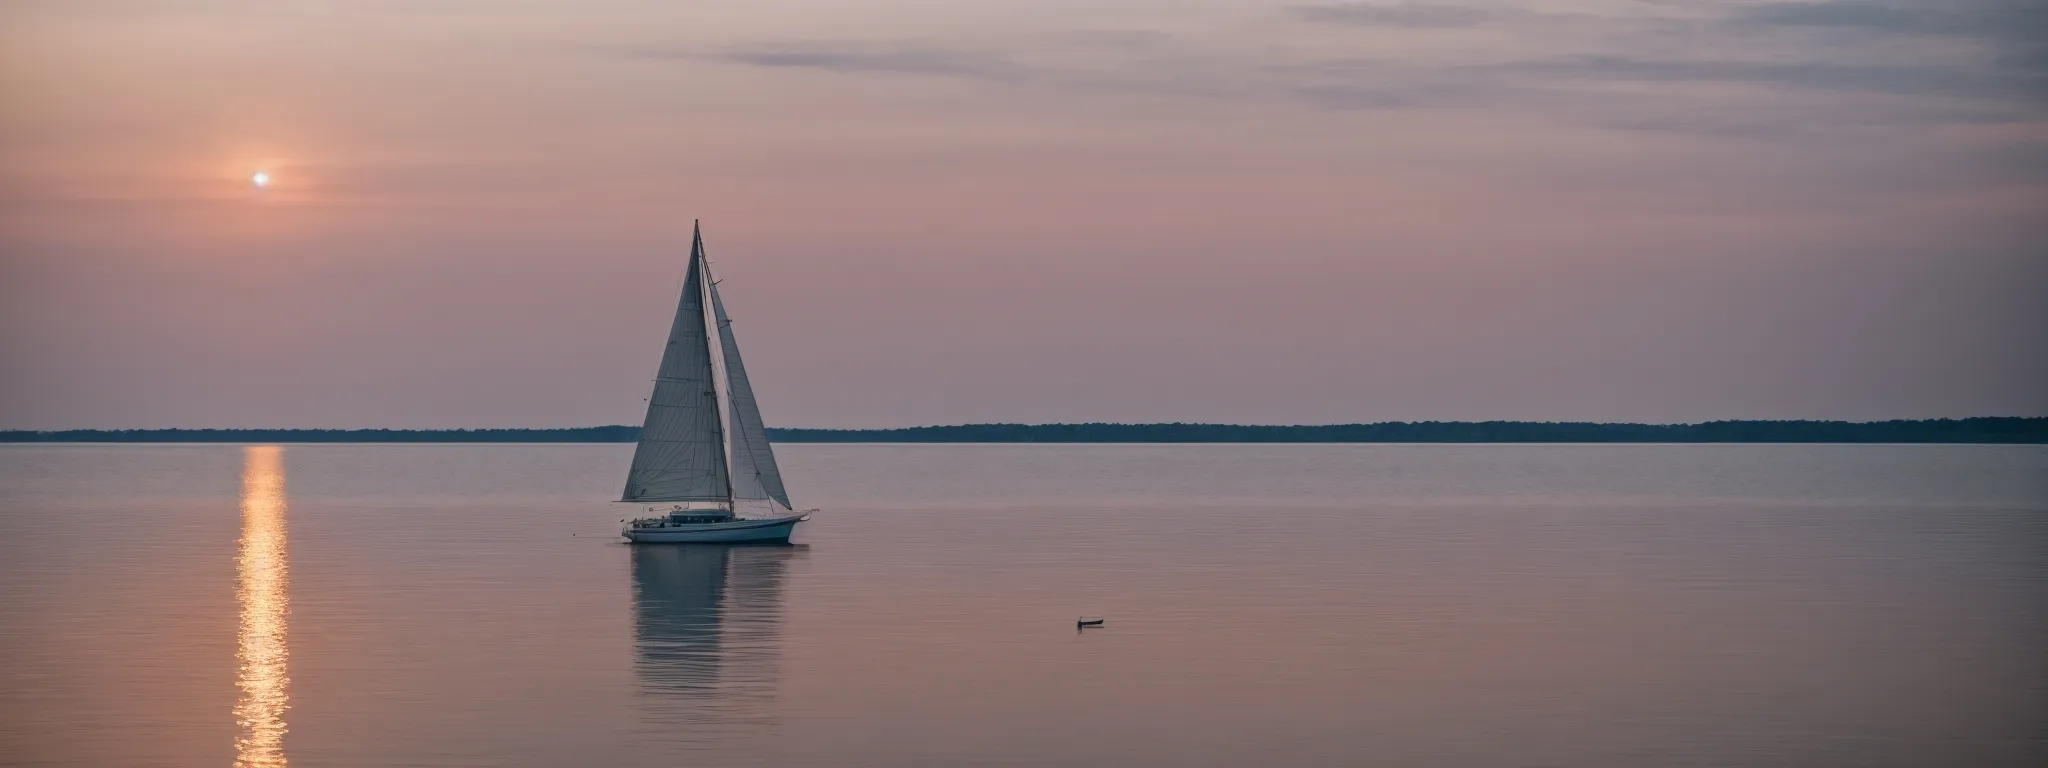 a solitary sailboat glides through the serene waters of chesapeake bay at dawn.